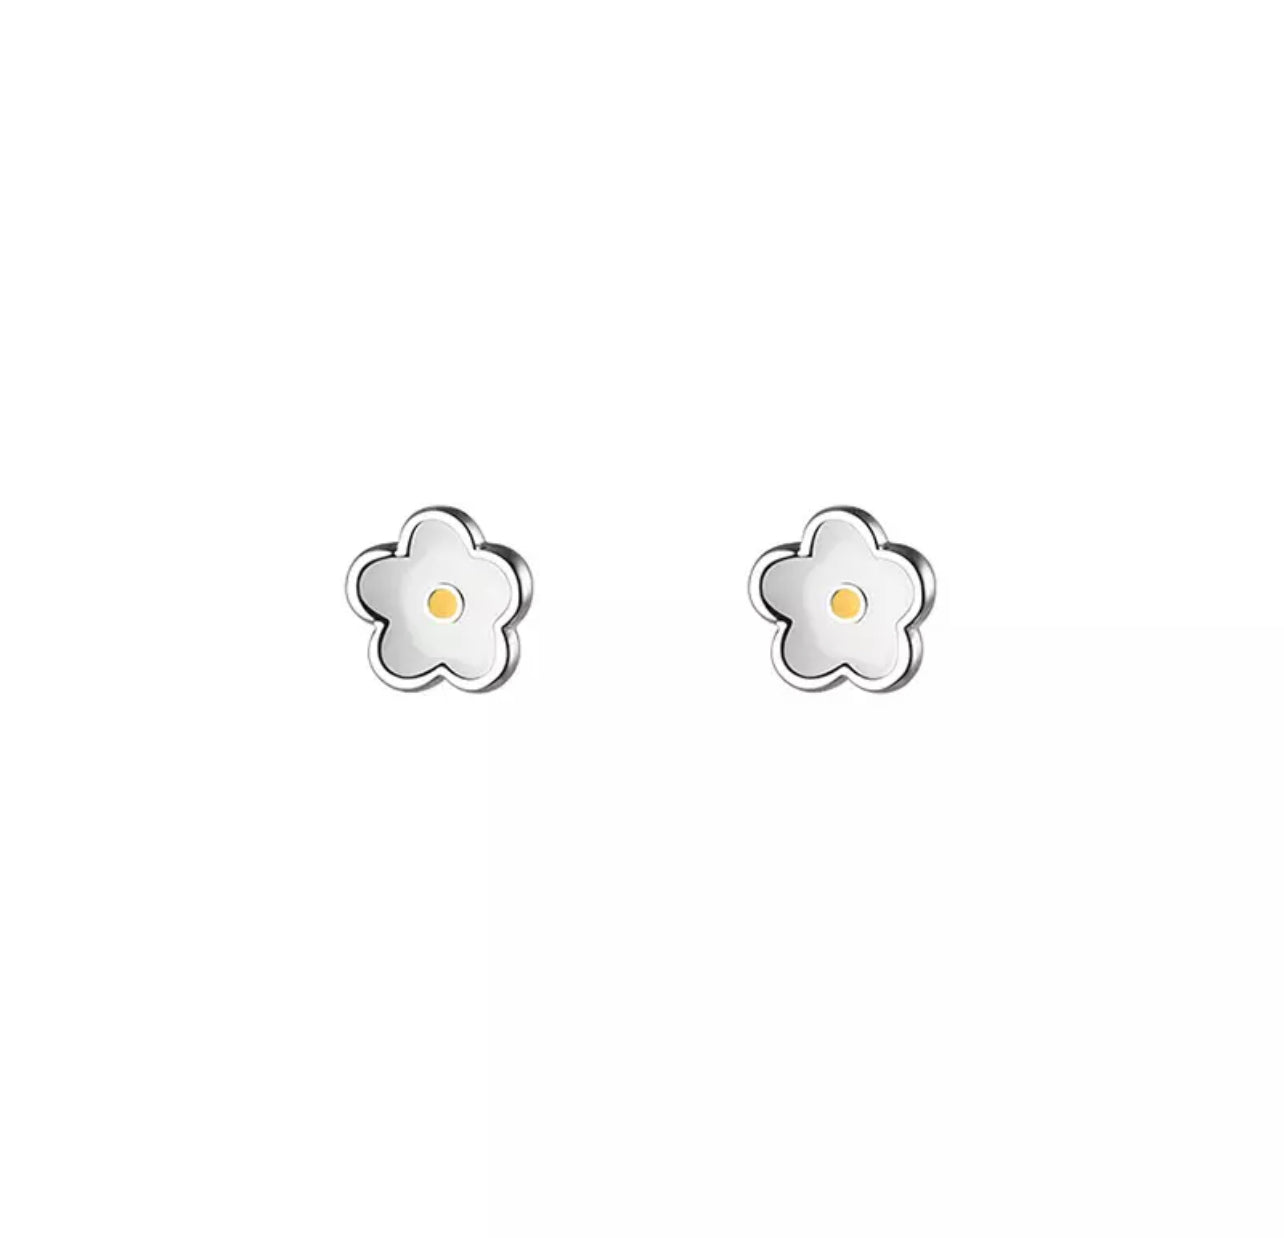 Sister Bows Sterling Silver Earrings Studs Daisy